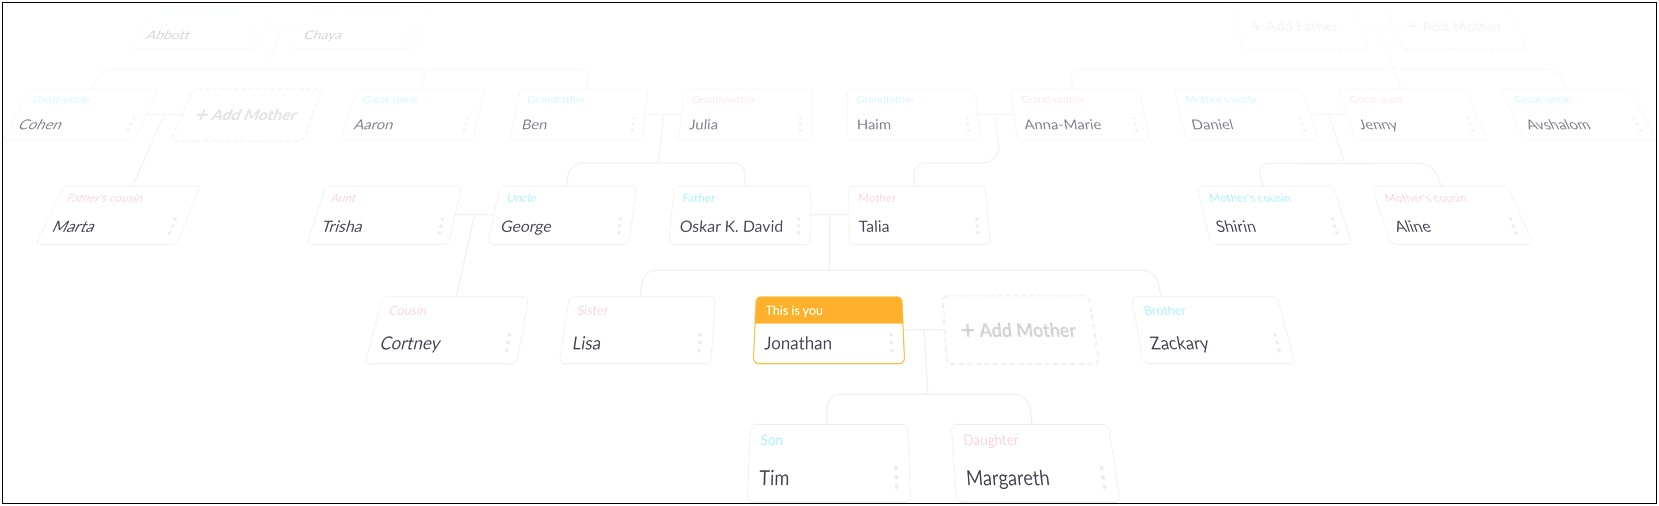 Free Online Family Tree Chart Template